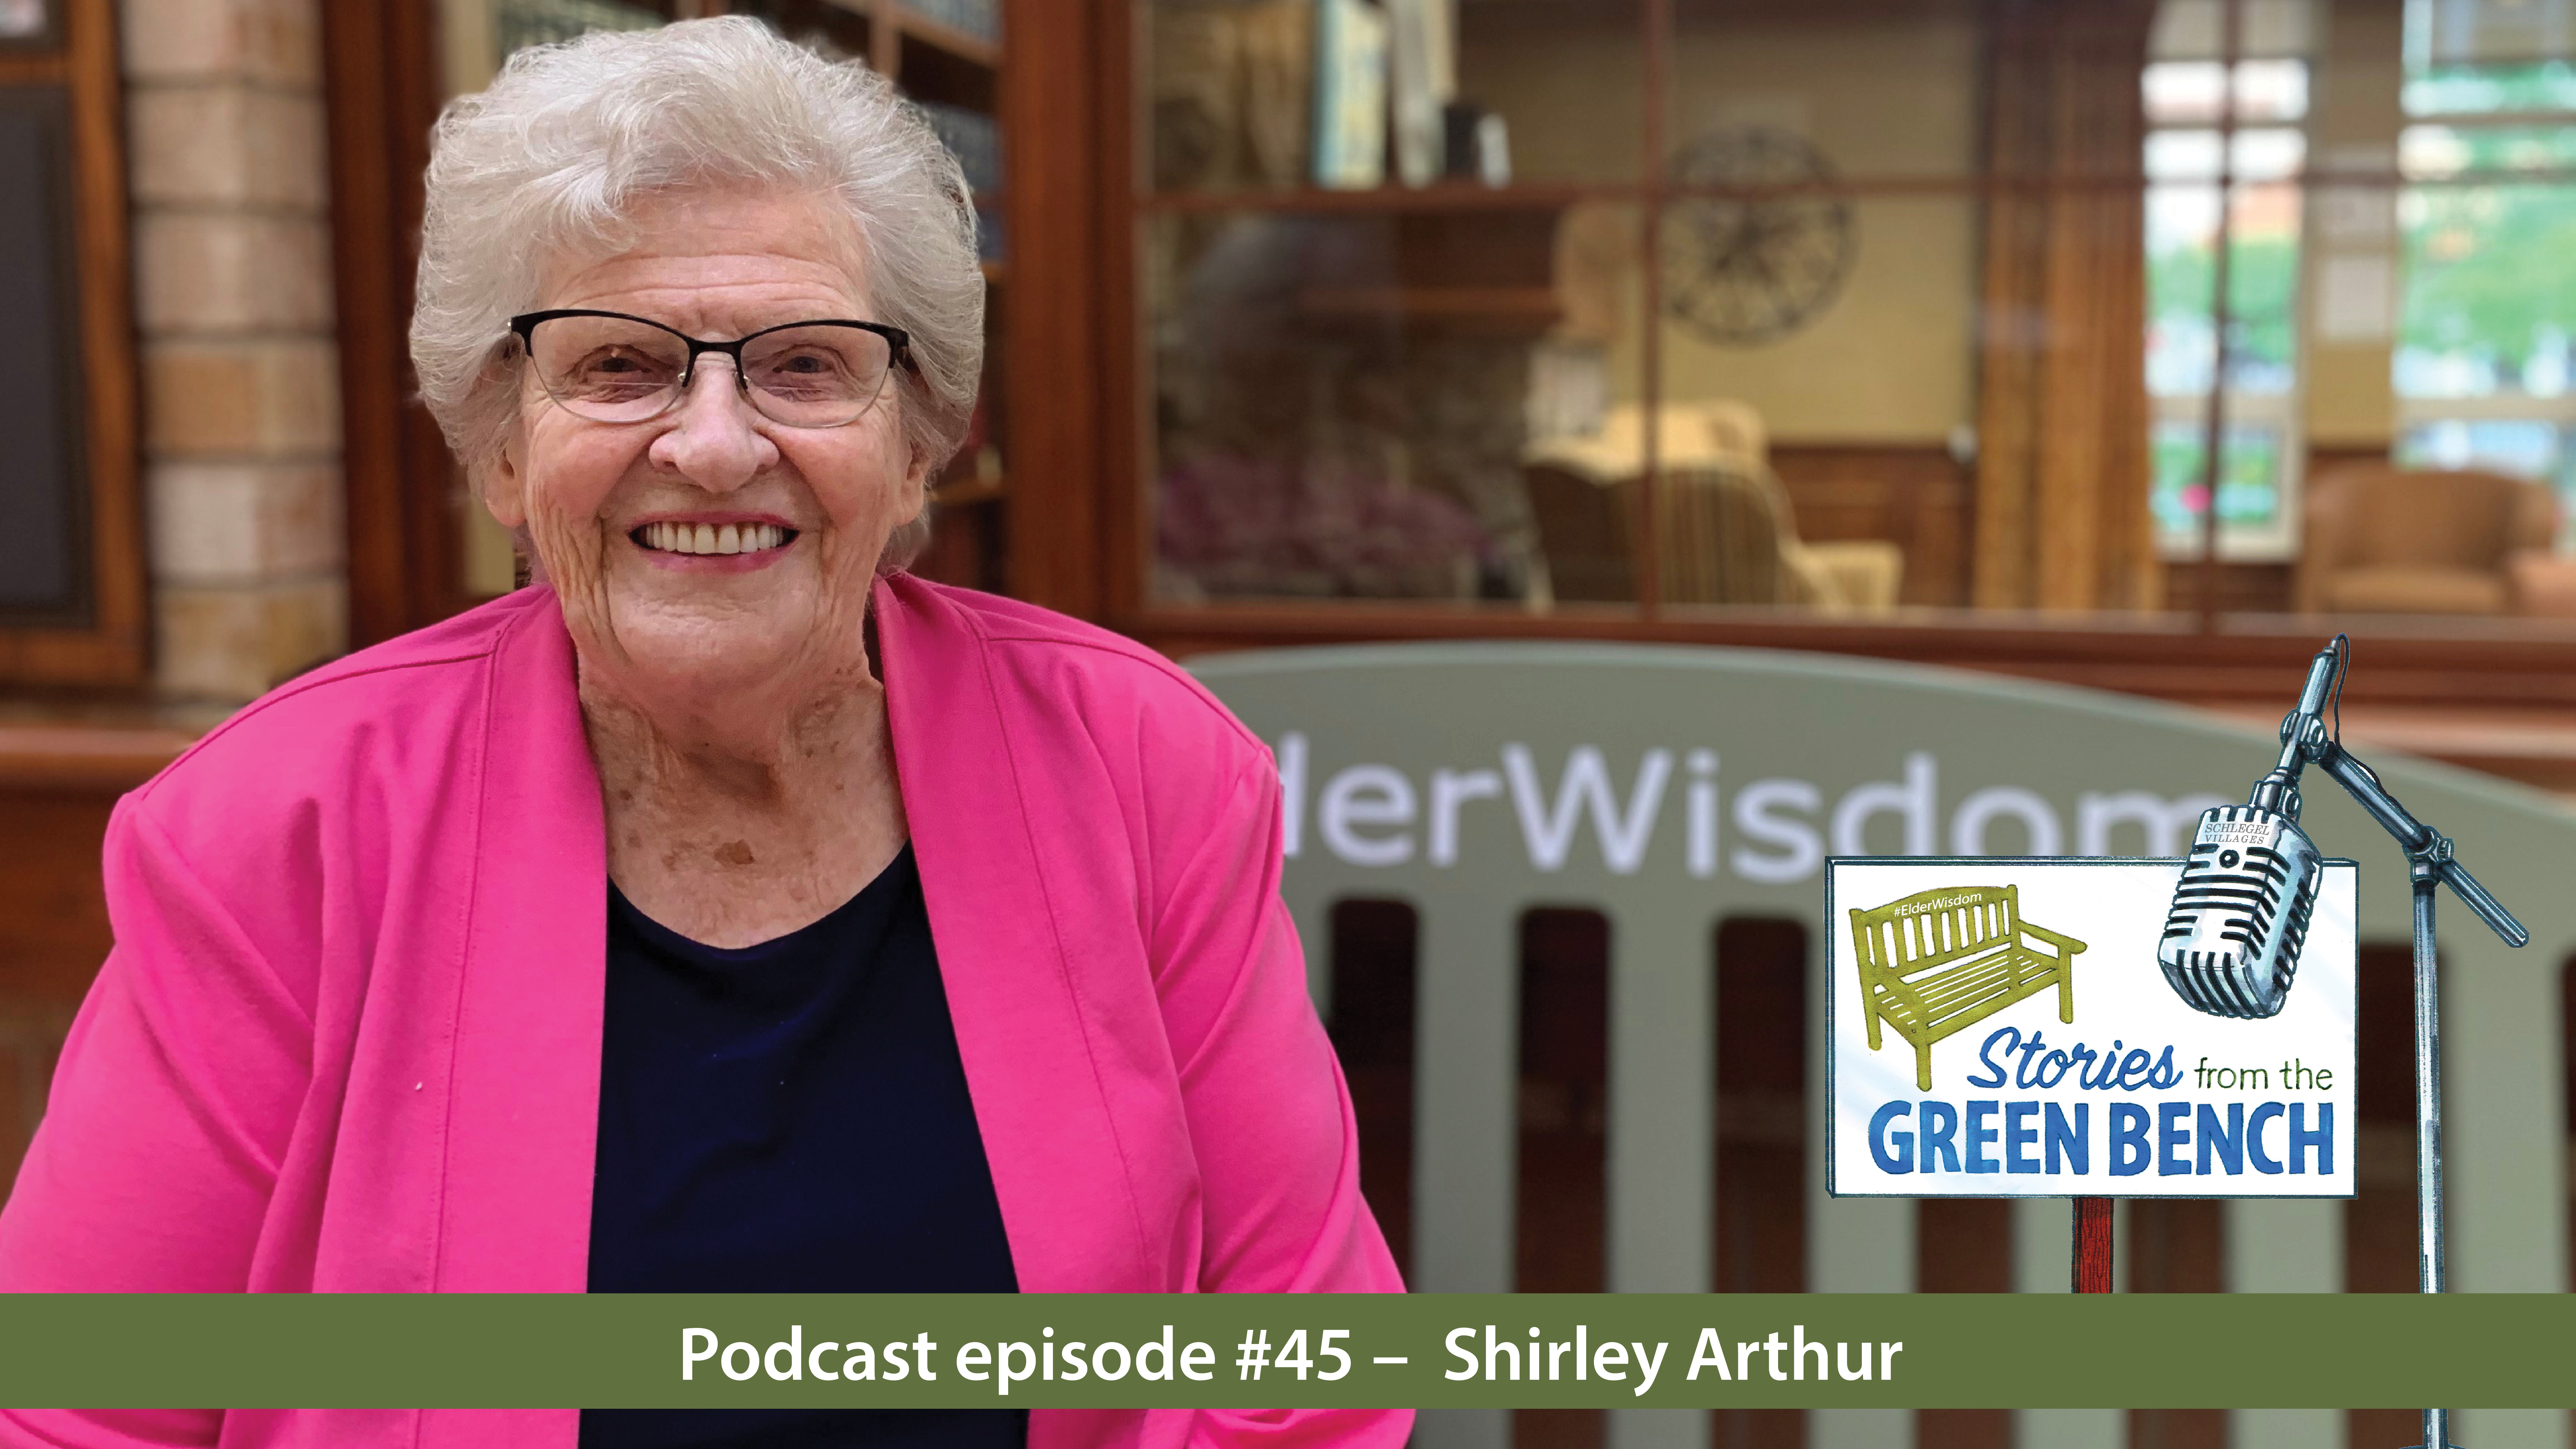 Shirley Arthur sitting on the green bench to promote the elder wisdom podcast